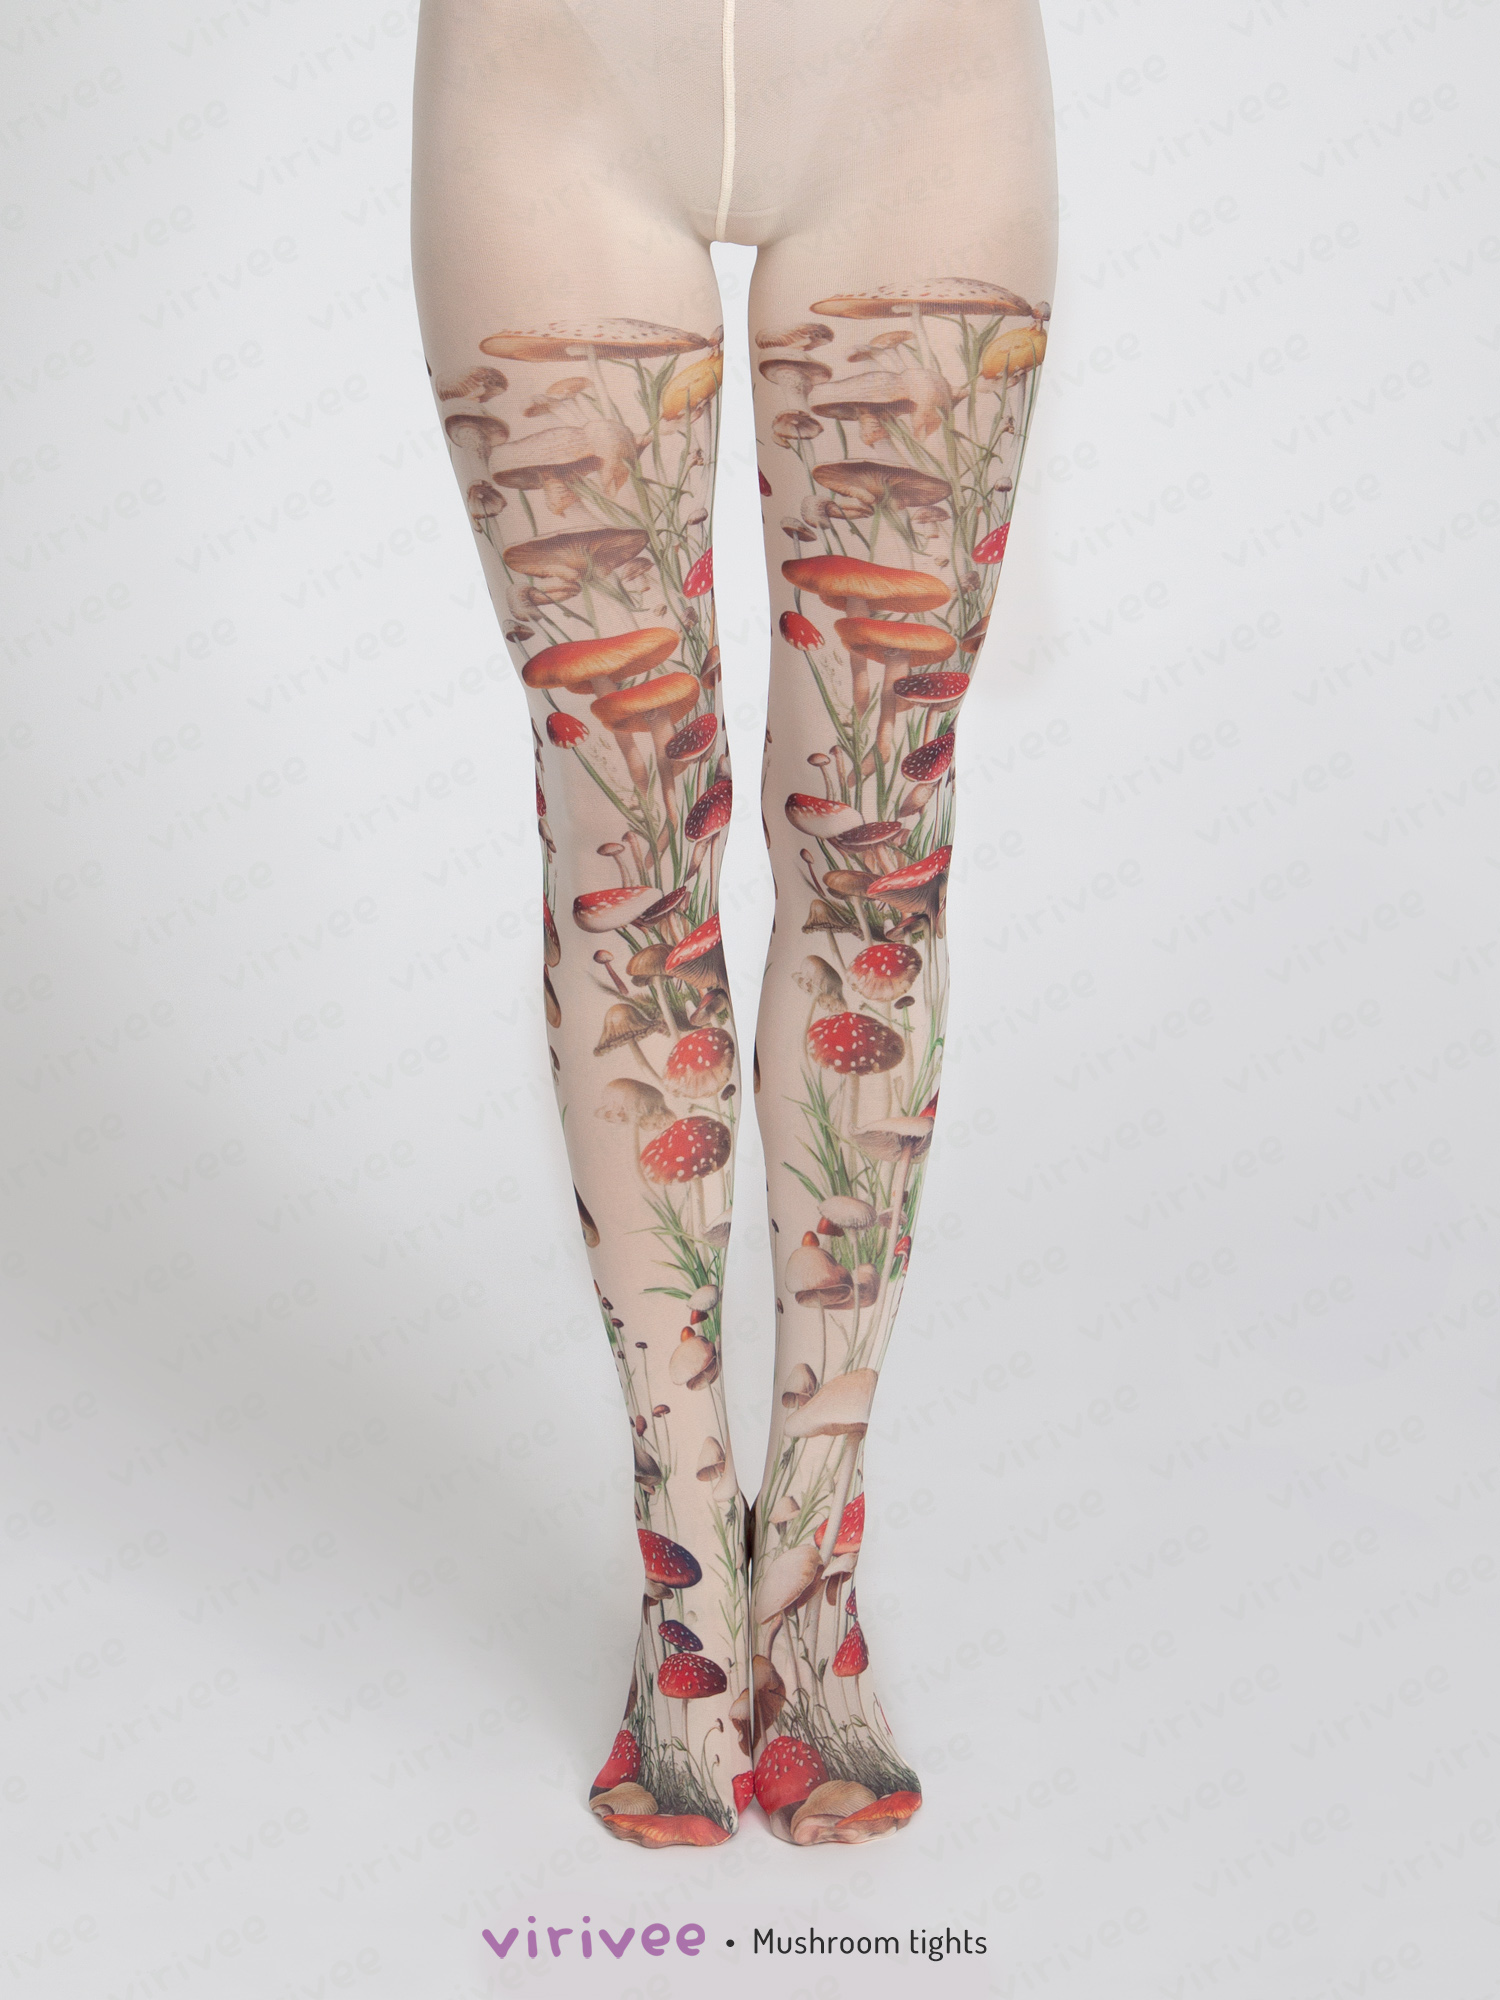 weird tights - Virivee Tights - Unique tights designed and made in Europe